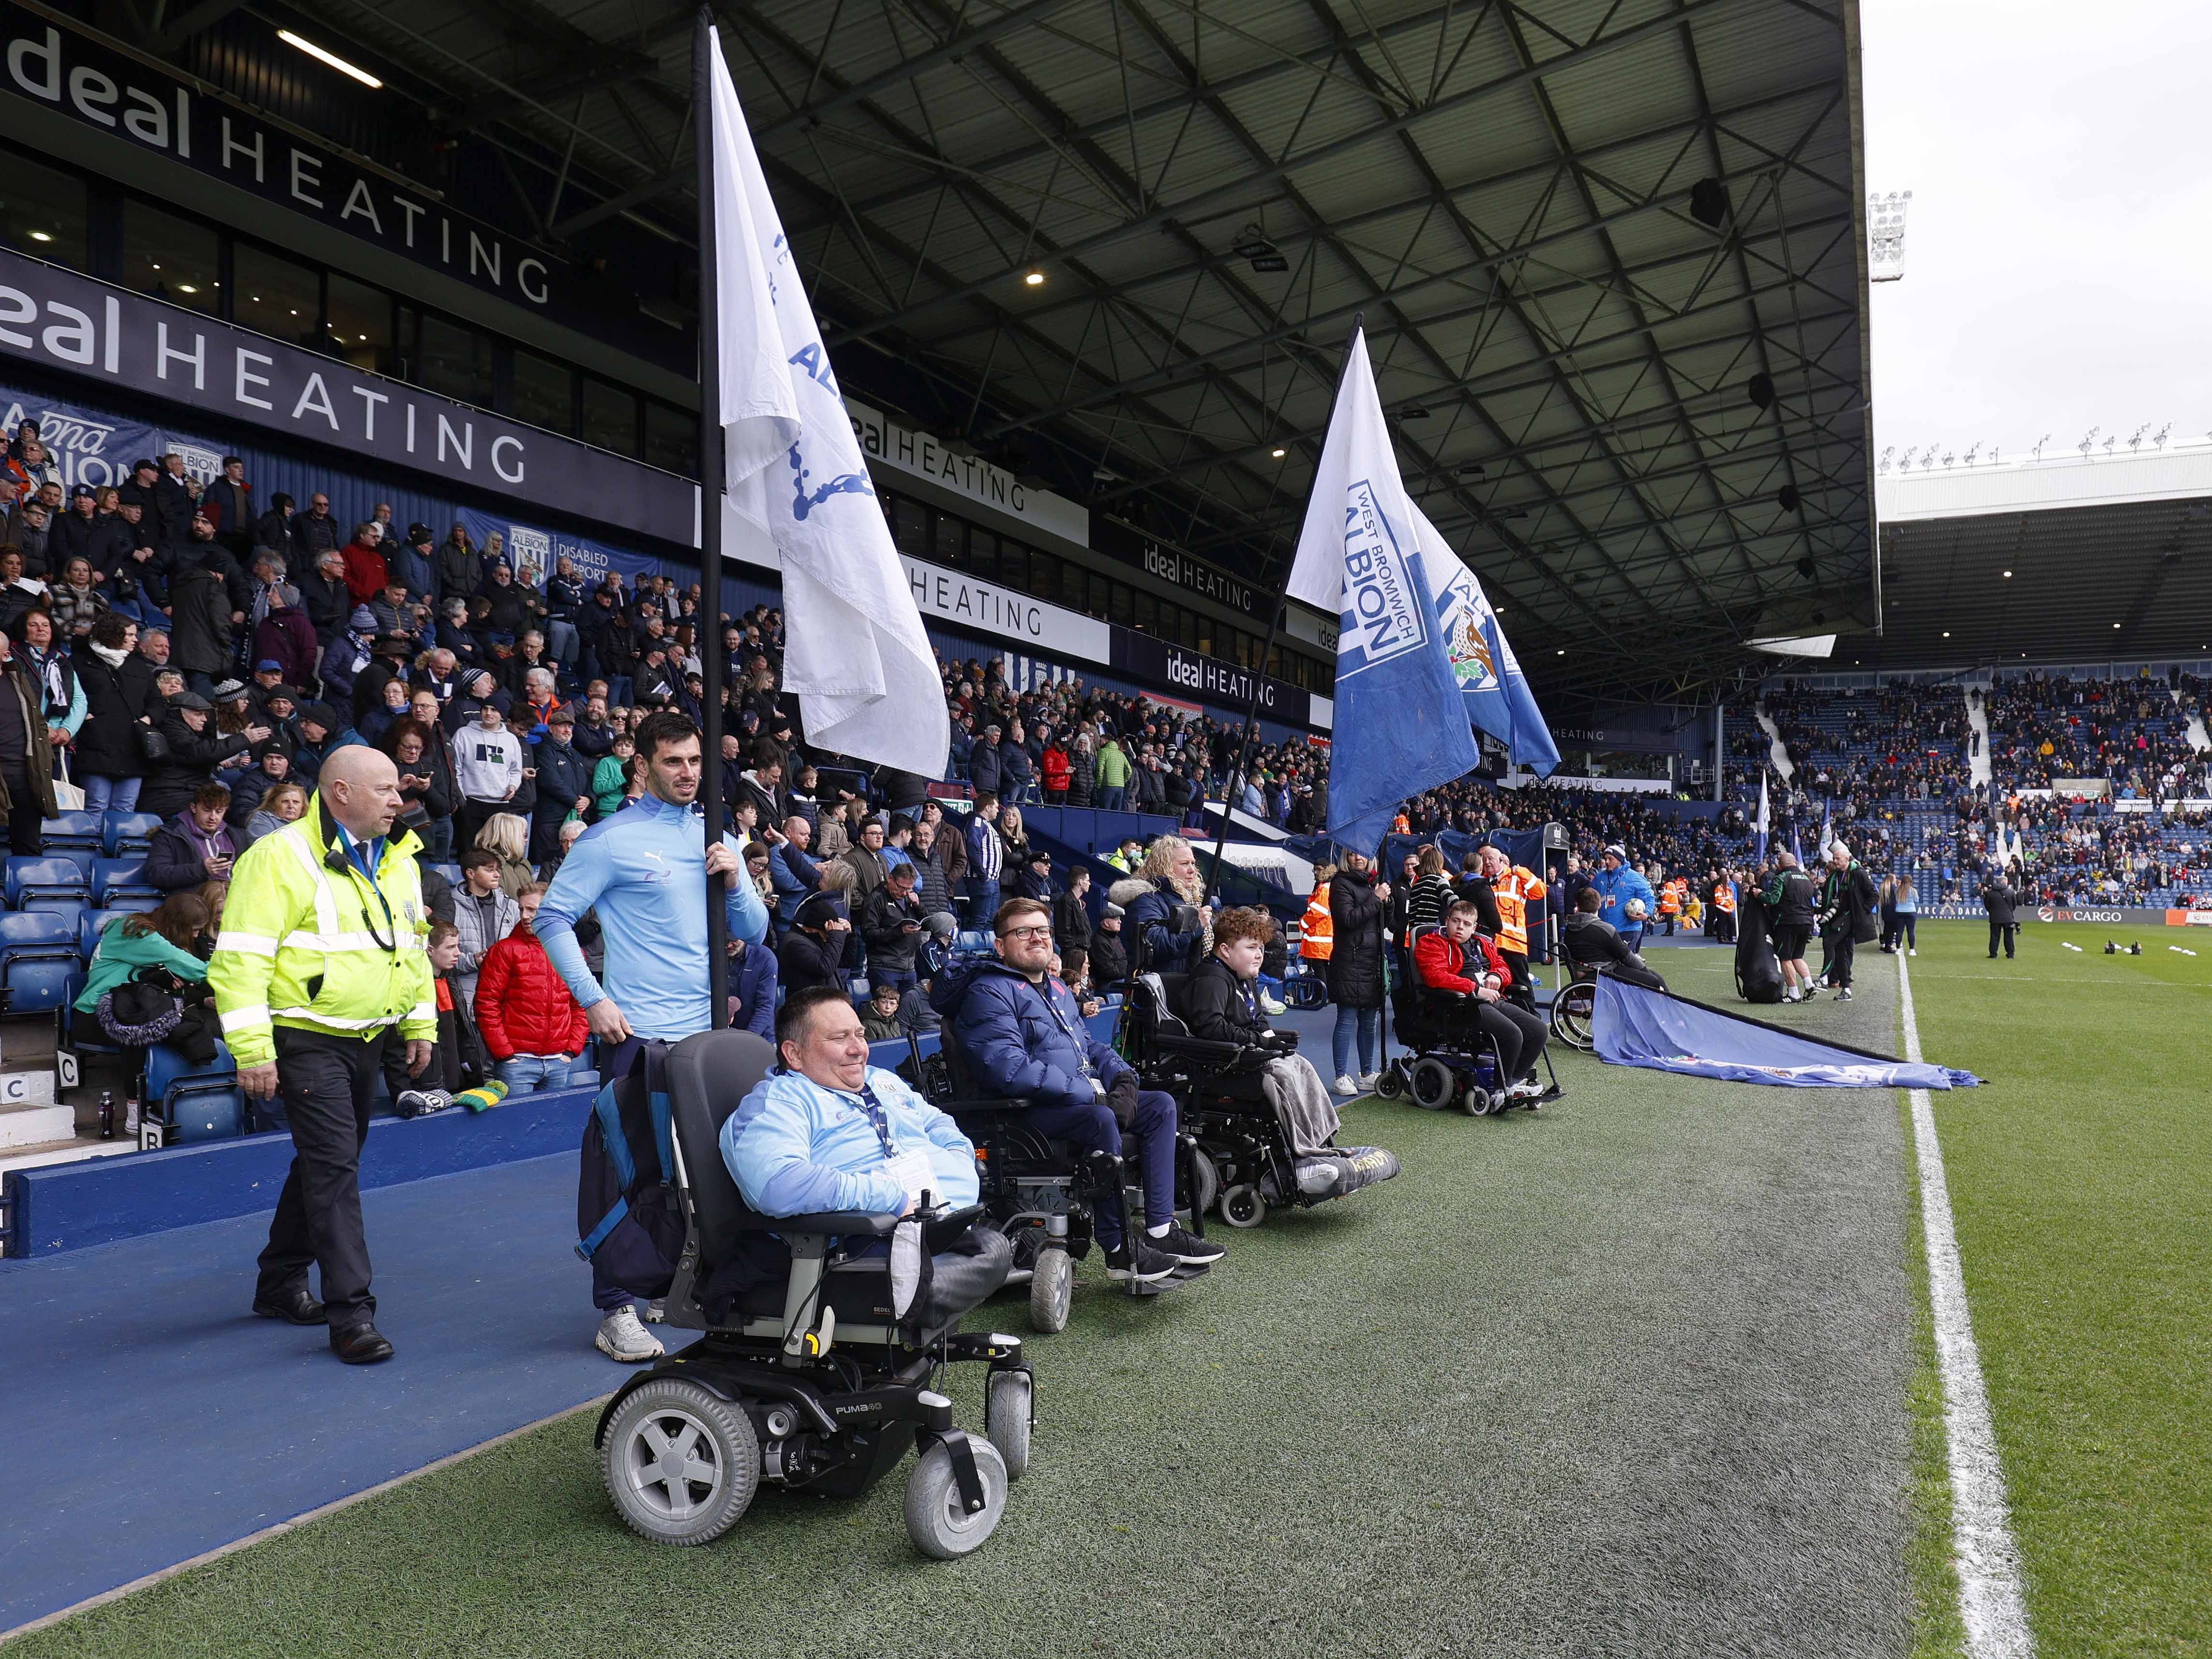 Signed match-worn shirts from The Albion Foundation Day fixture are now available at auction, with all proceeds aiding the ‘Power the Powerchairs’ campaign